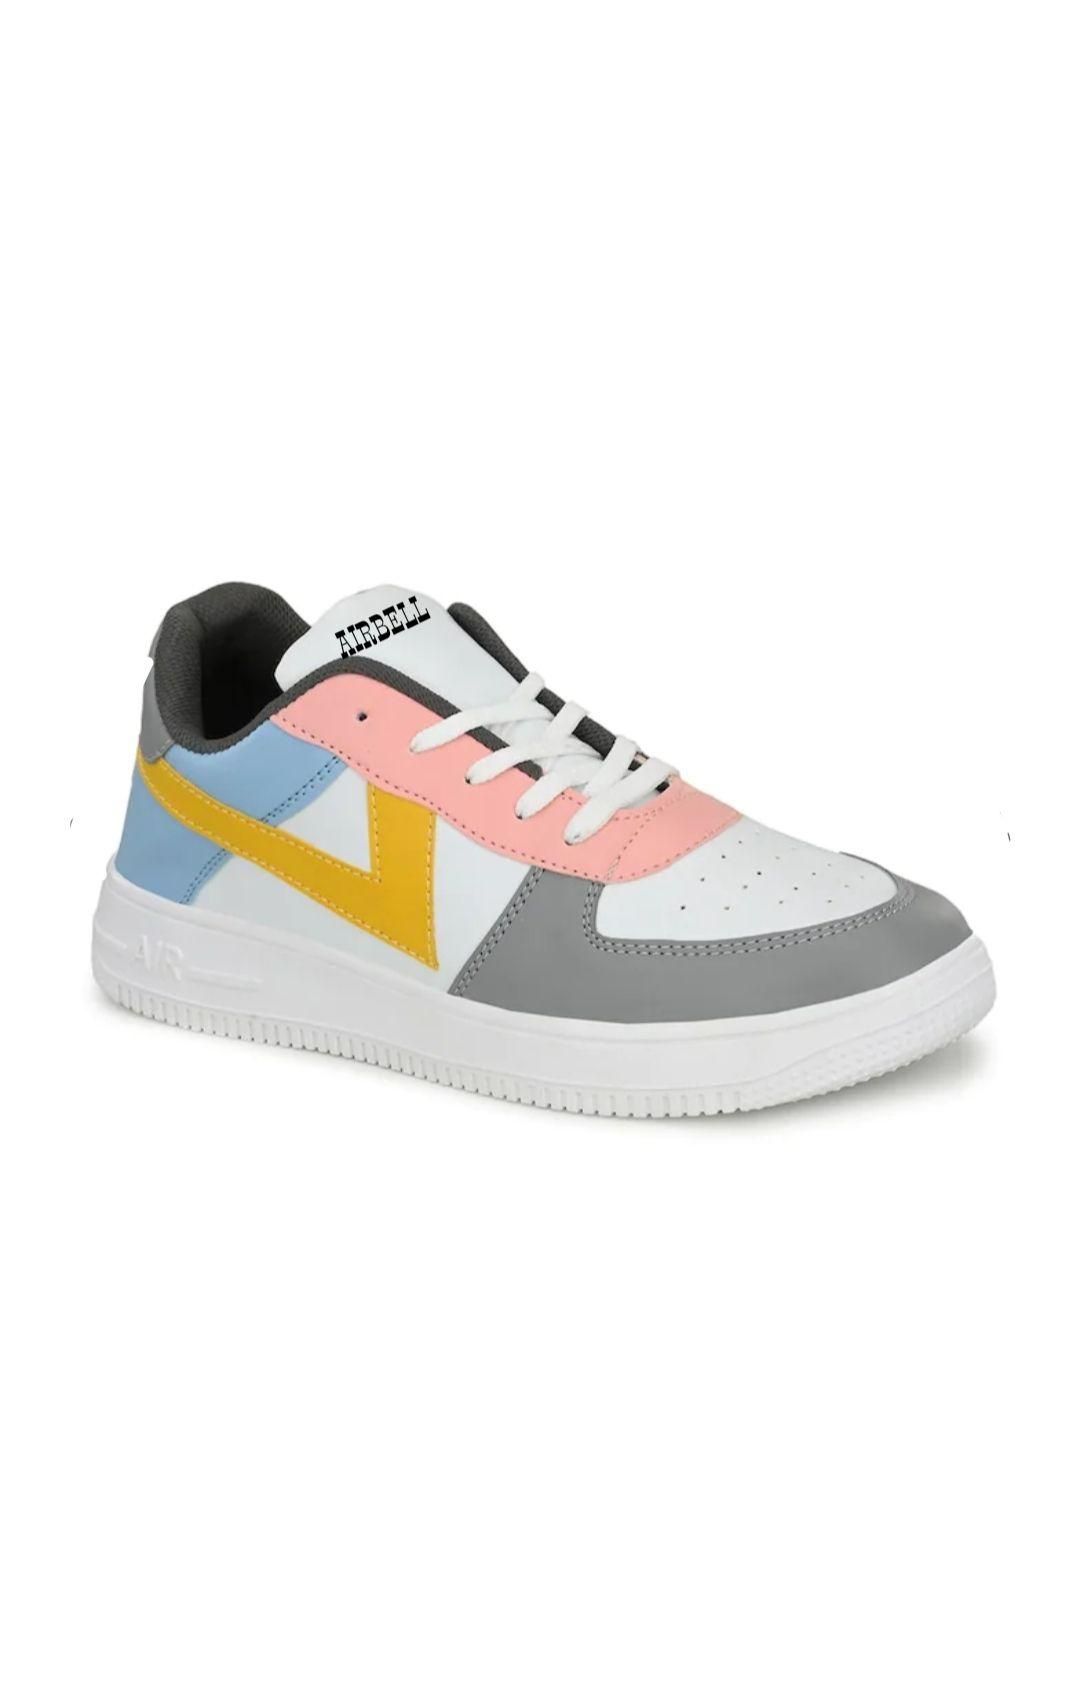 Airbell Pink Synthetic Leather Casual Sneakers for Men